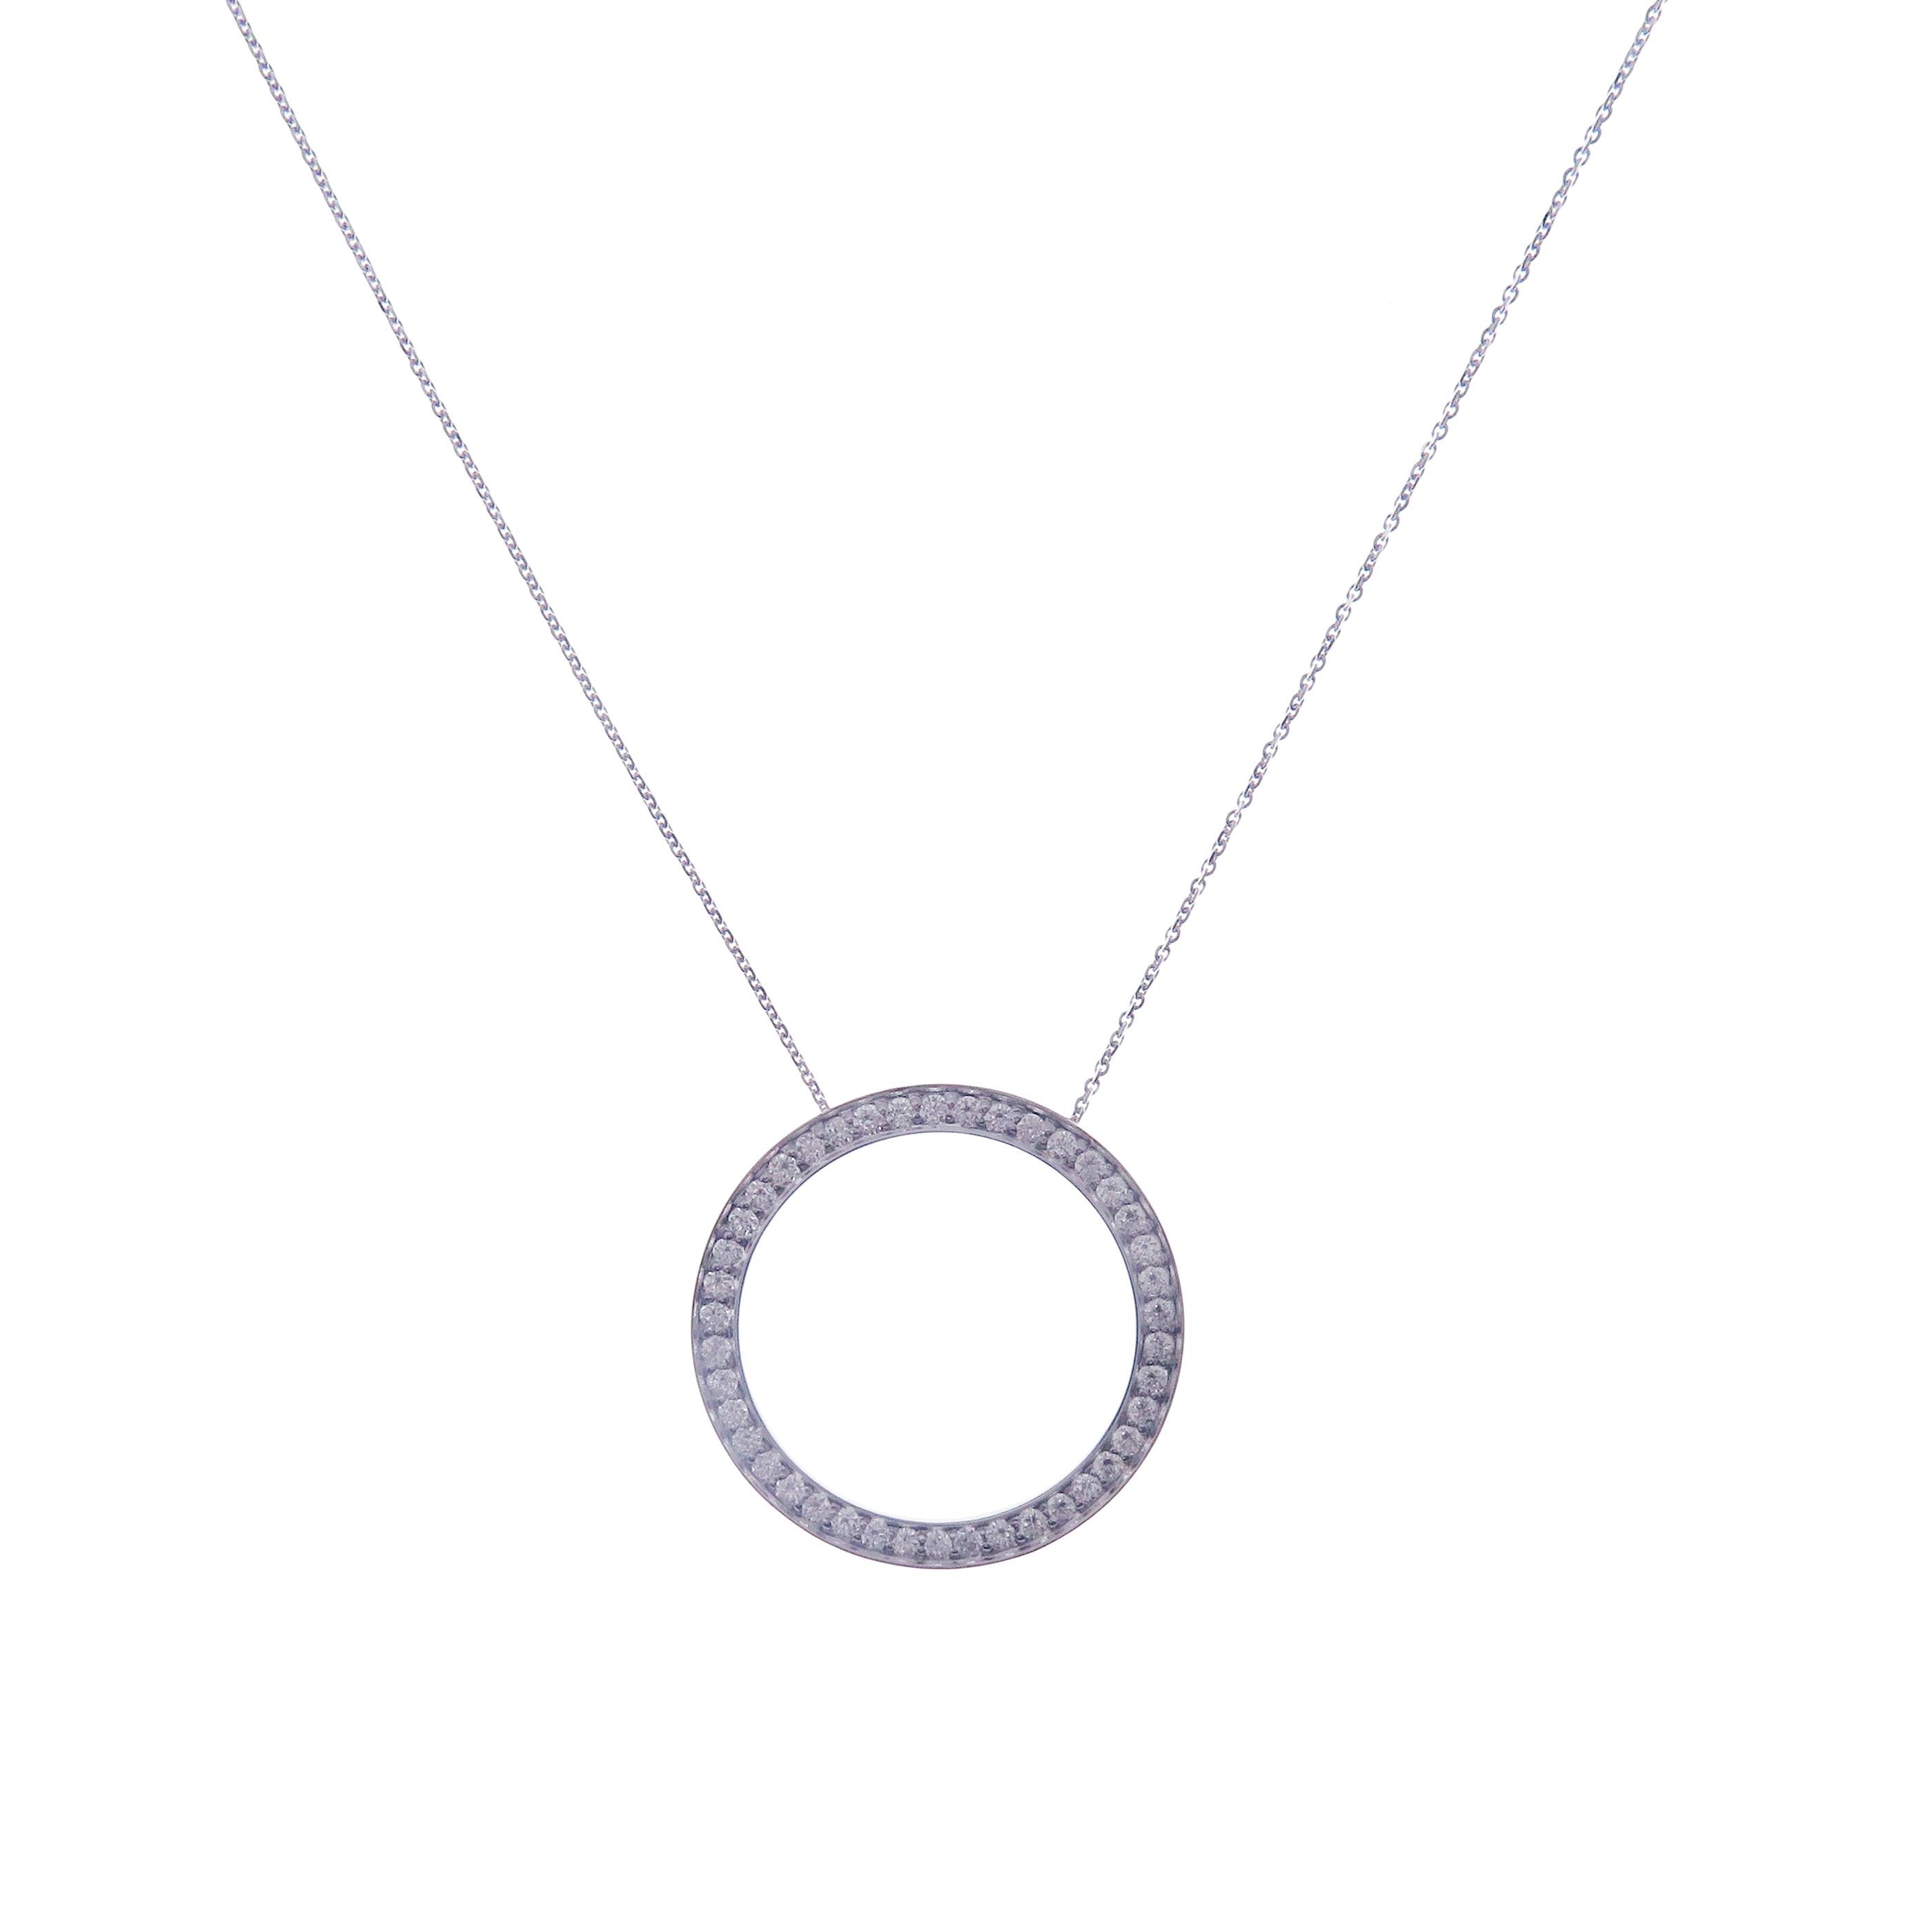 This medium circle necklace is crafted in 18-karat white gold, weighing approximately 0.89 total carats of SI-V Quality white diamond. 

Necklace is 16